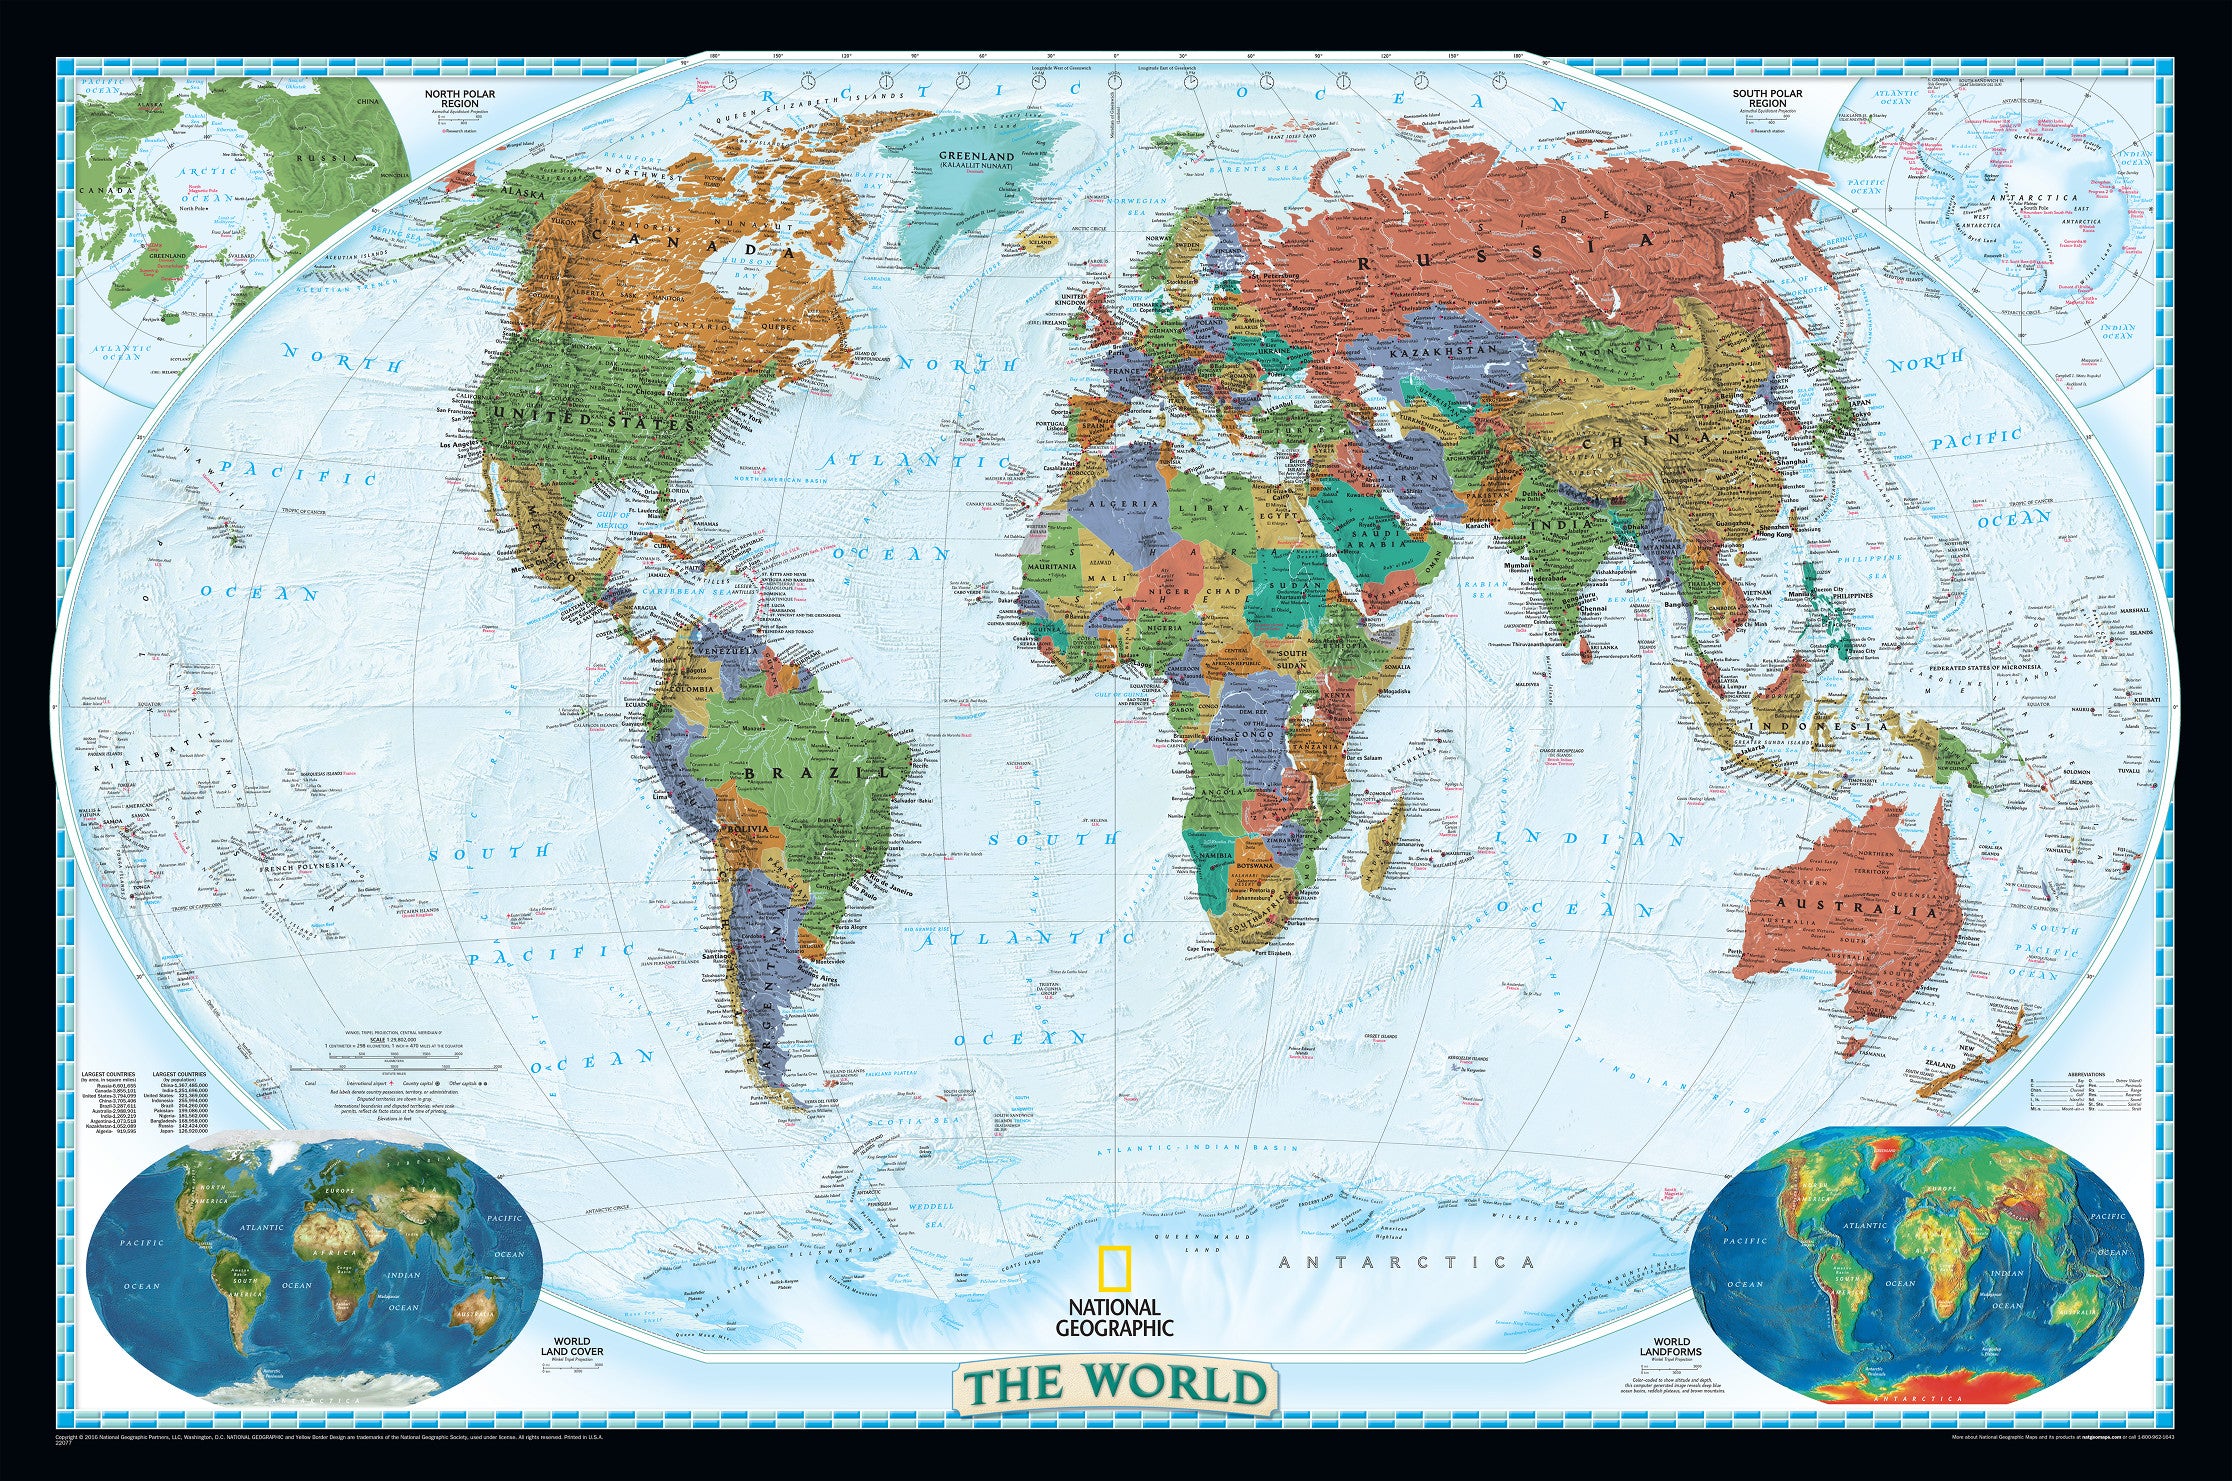 World Decorator Wall Map by National Geographic (2009)